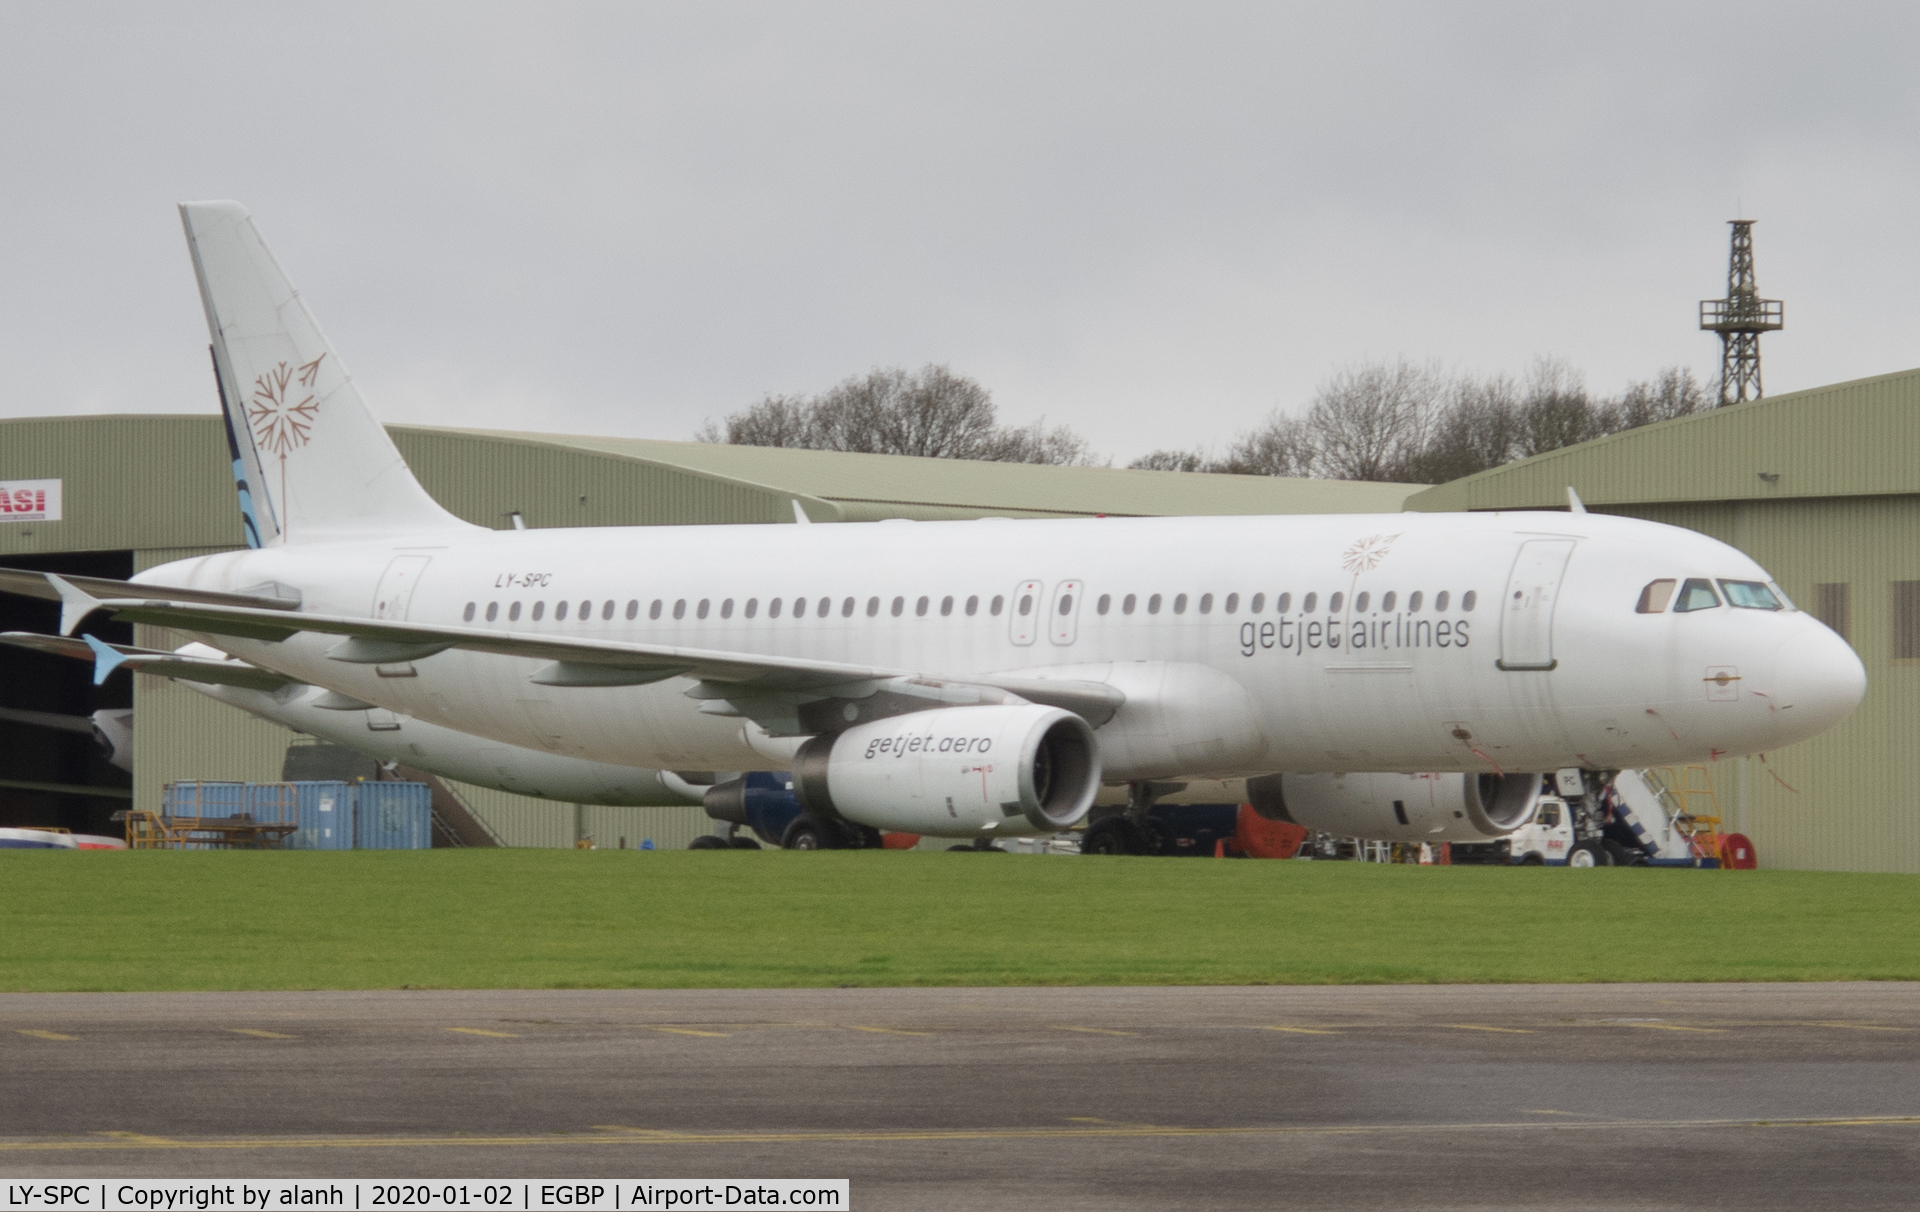 LY-SPC, 1994 Airbus A320-231 C/N 415, Parked at Kemble, with getjet airlines titles